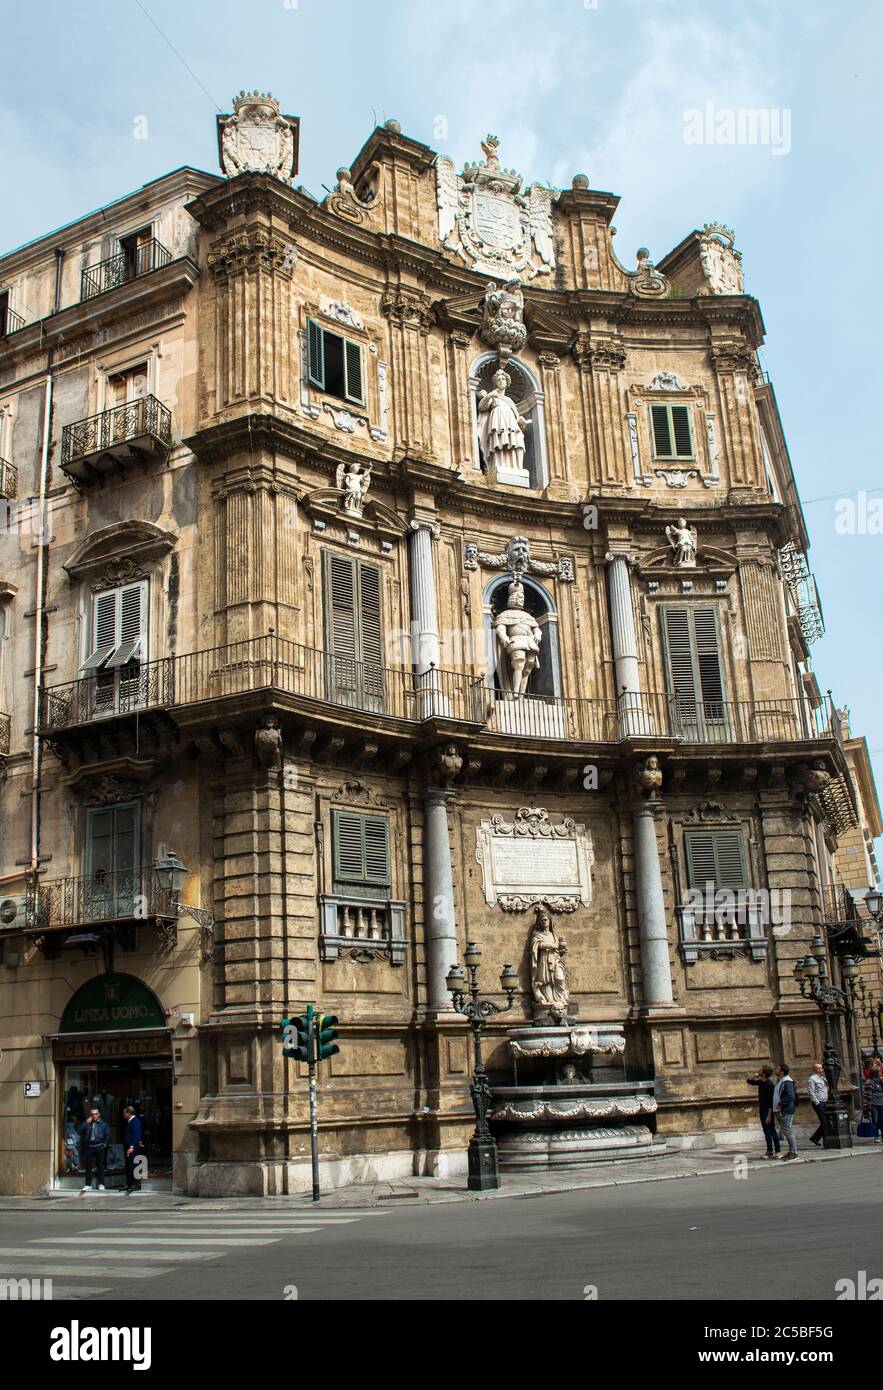 Quattro Canti - Four Corners, officially known as Piazza Vigliena, is a Baroque square in Palermo, Sicily, Italy Stock Photo